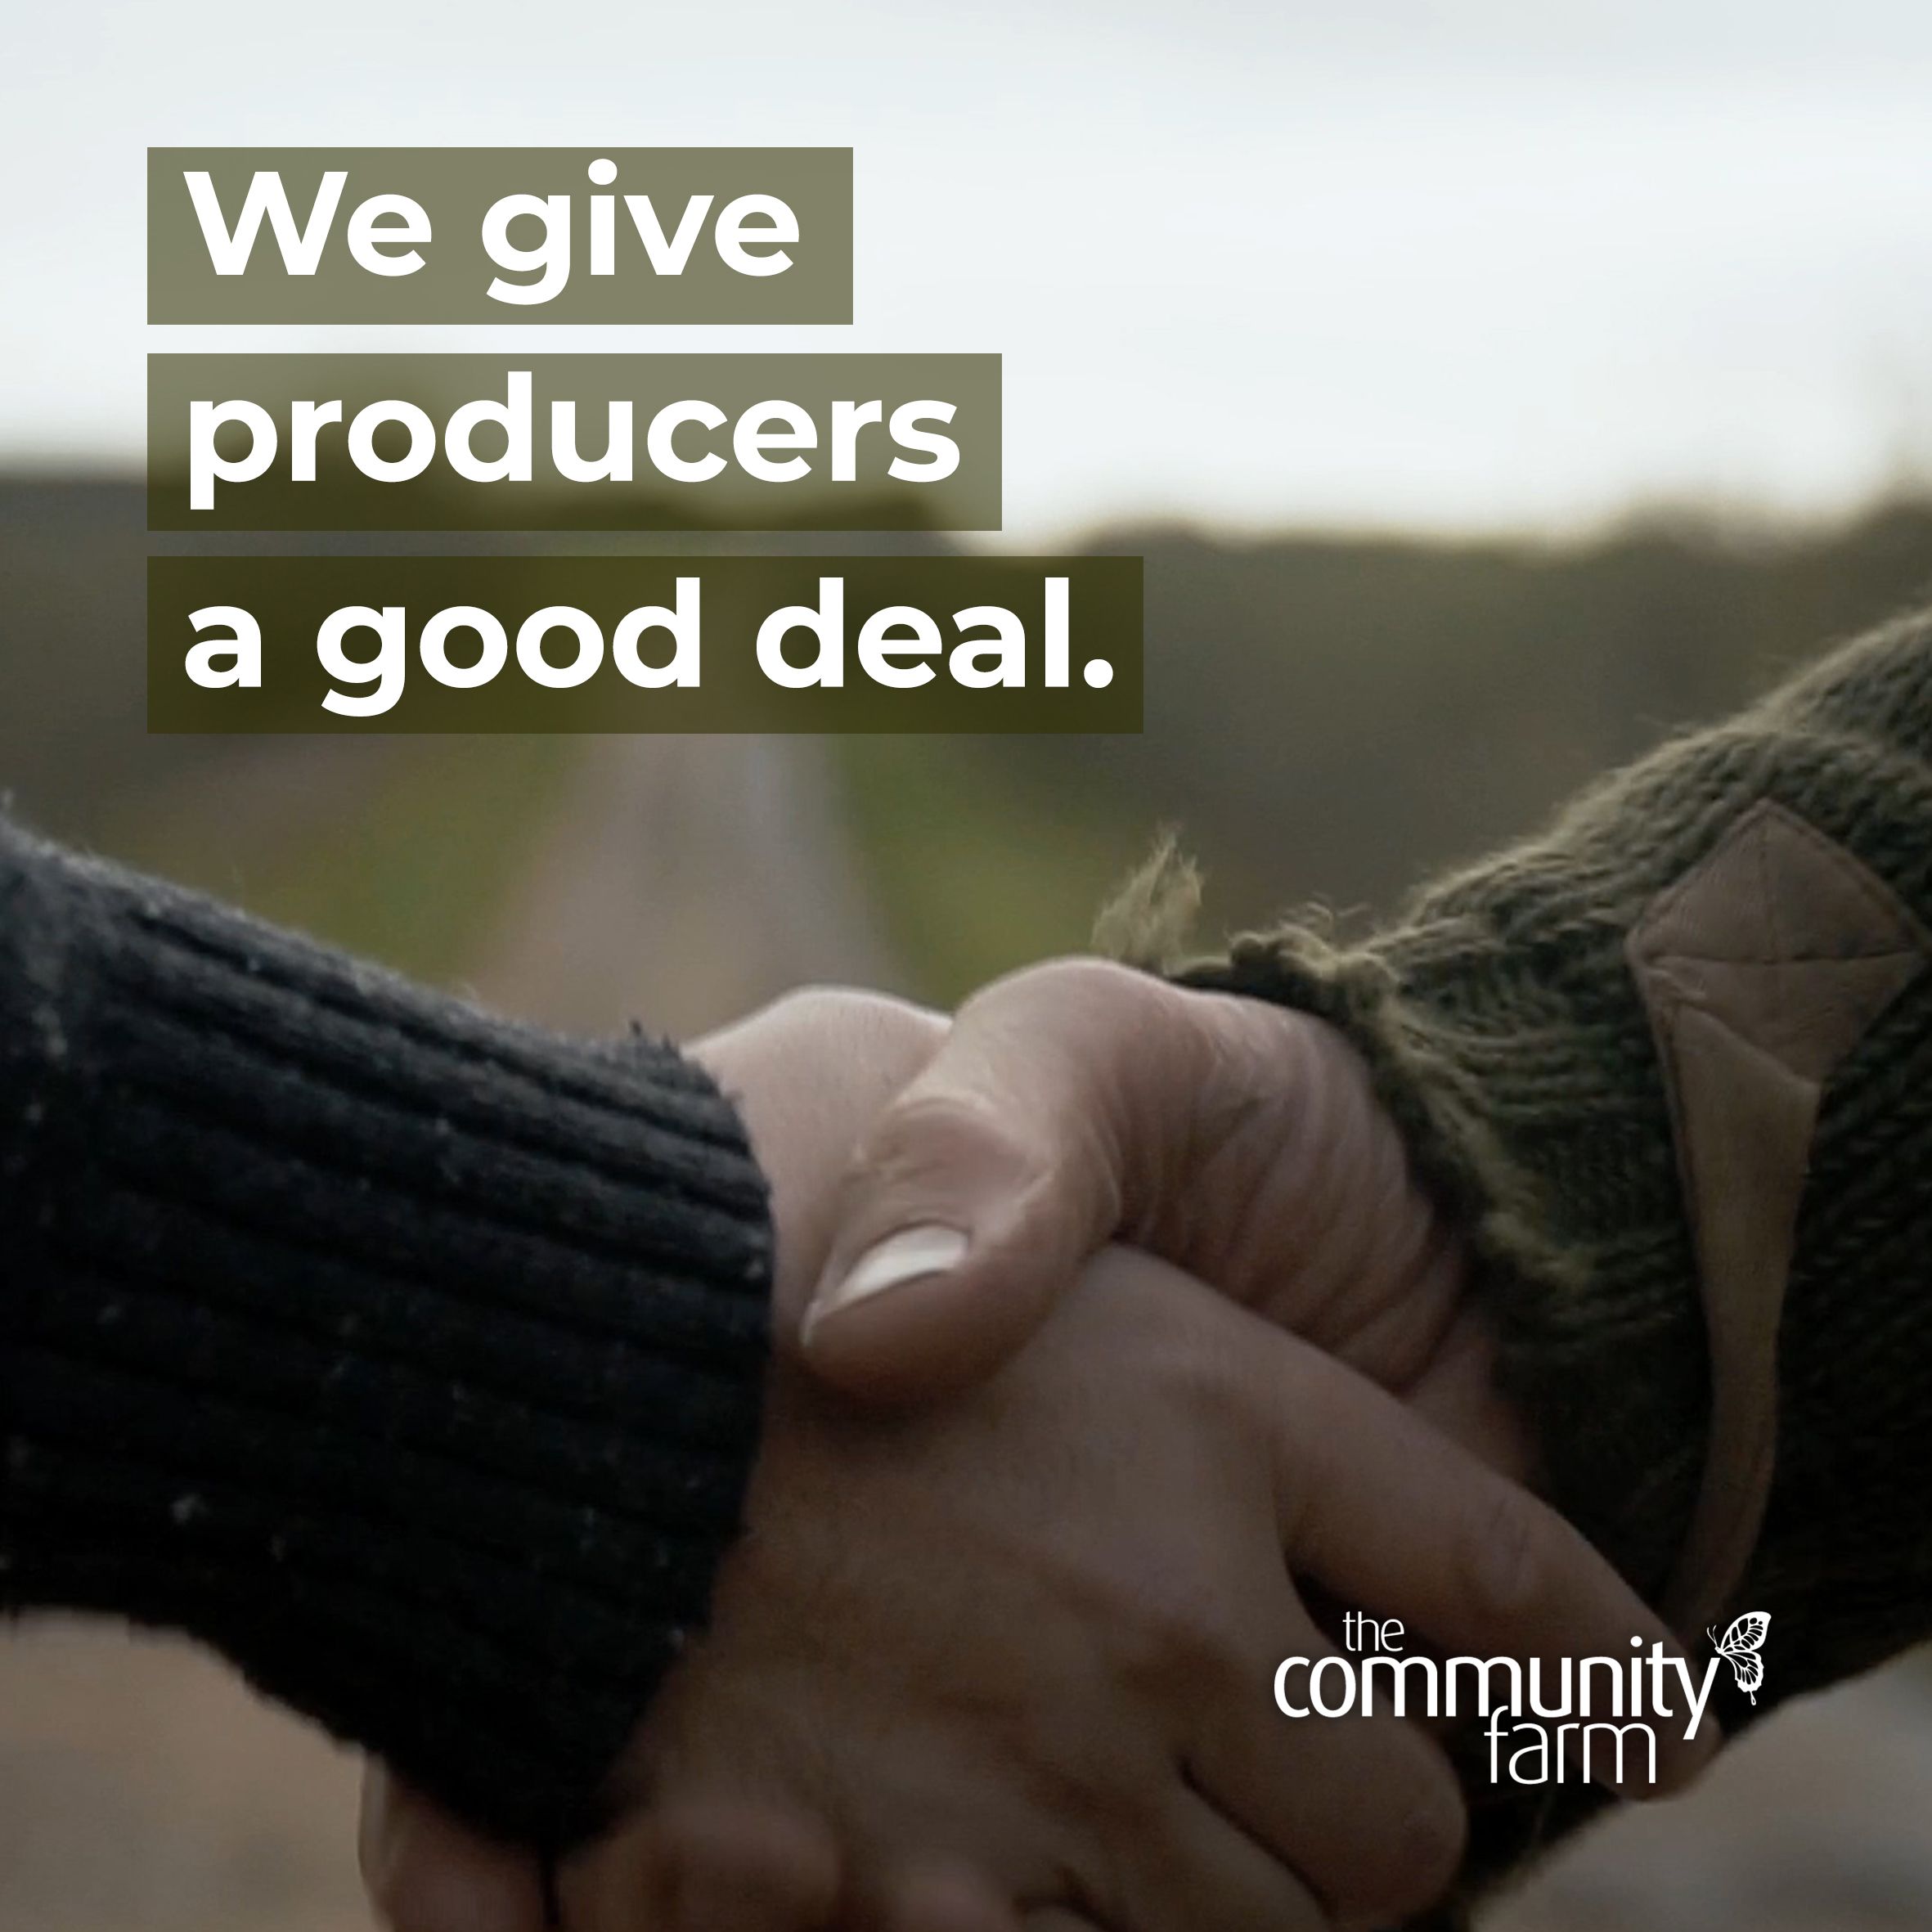 We give our producers a good deal